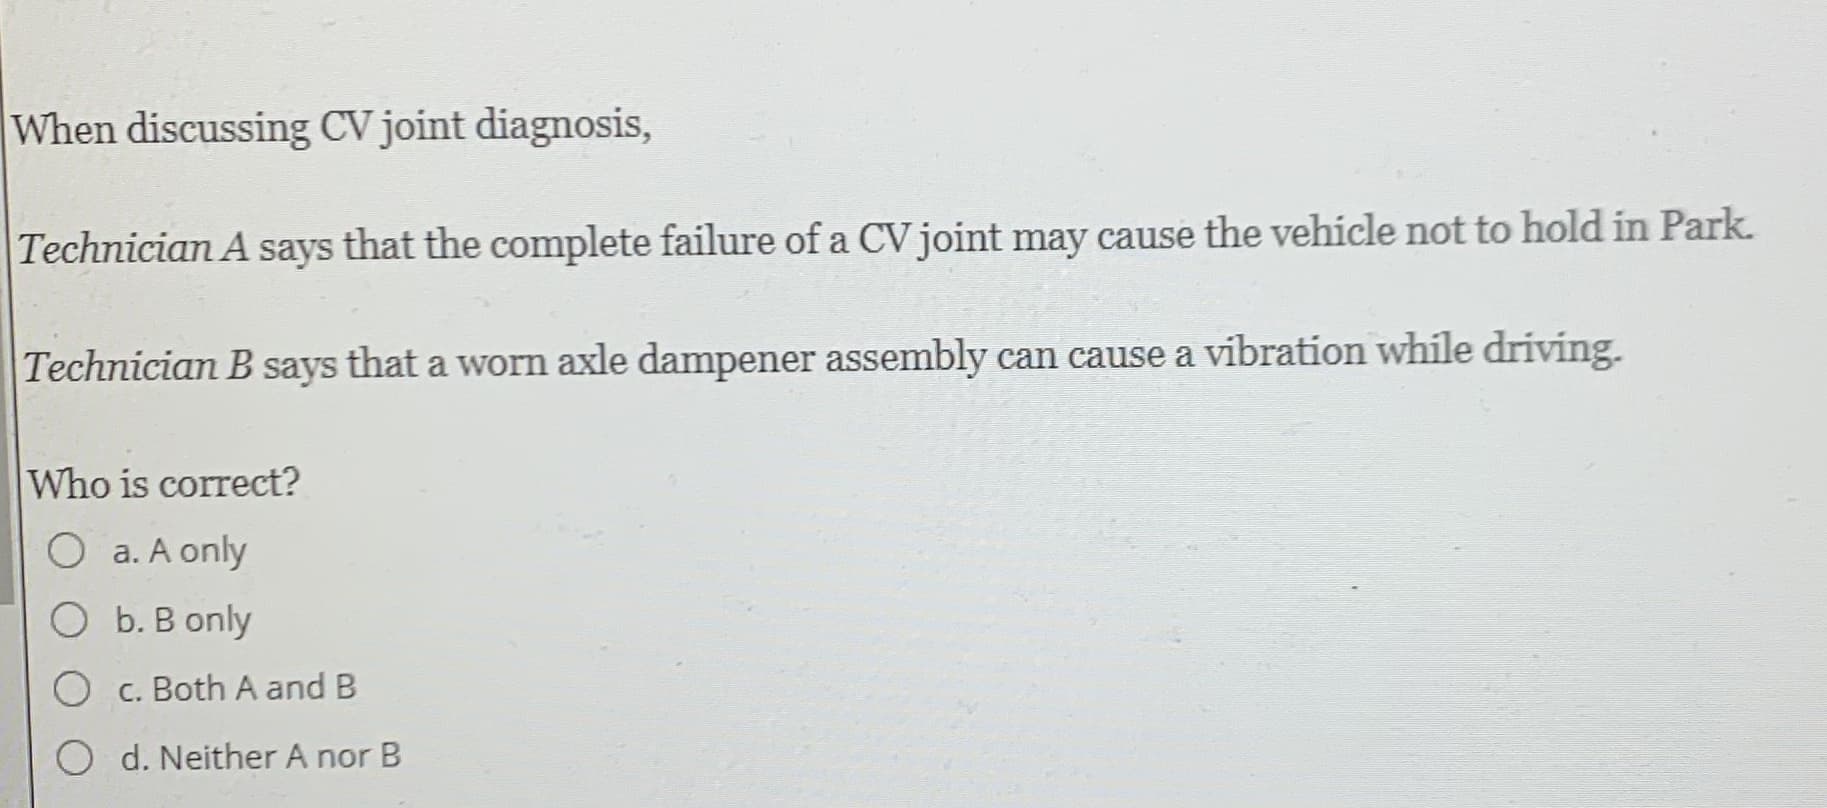 When discussing CV joint diagnosis,
Technician A says that the complete failure of a CV joint may cause the vehicle not to hold in Park.
Technician B says that a worn axle dampener assembly can cause a vibration while driving.
Who is correct?
O a. A only
O b. B only
c. Both A and B
O d. Neither A nor B
